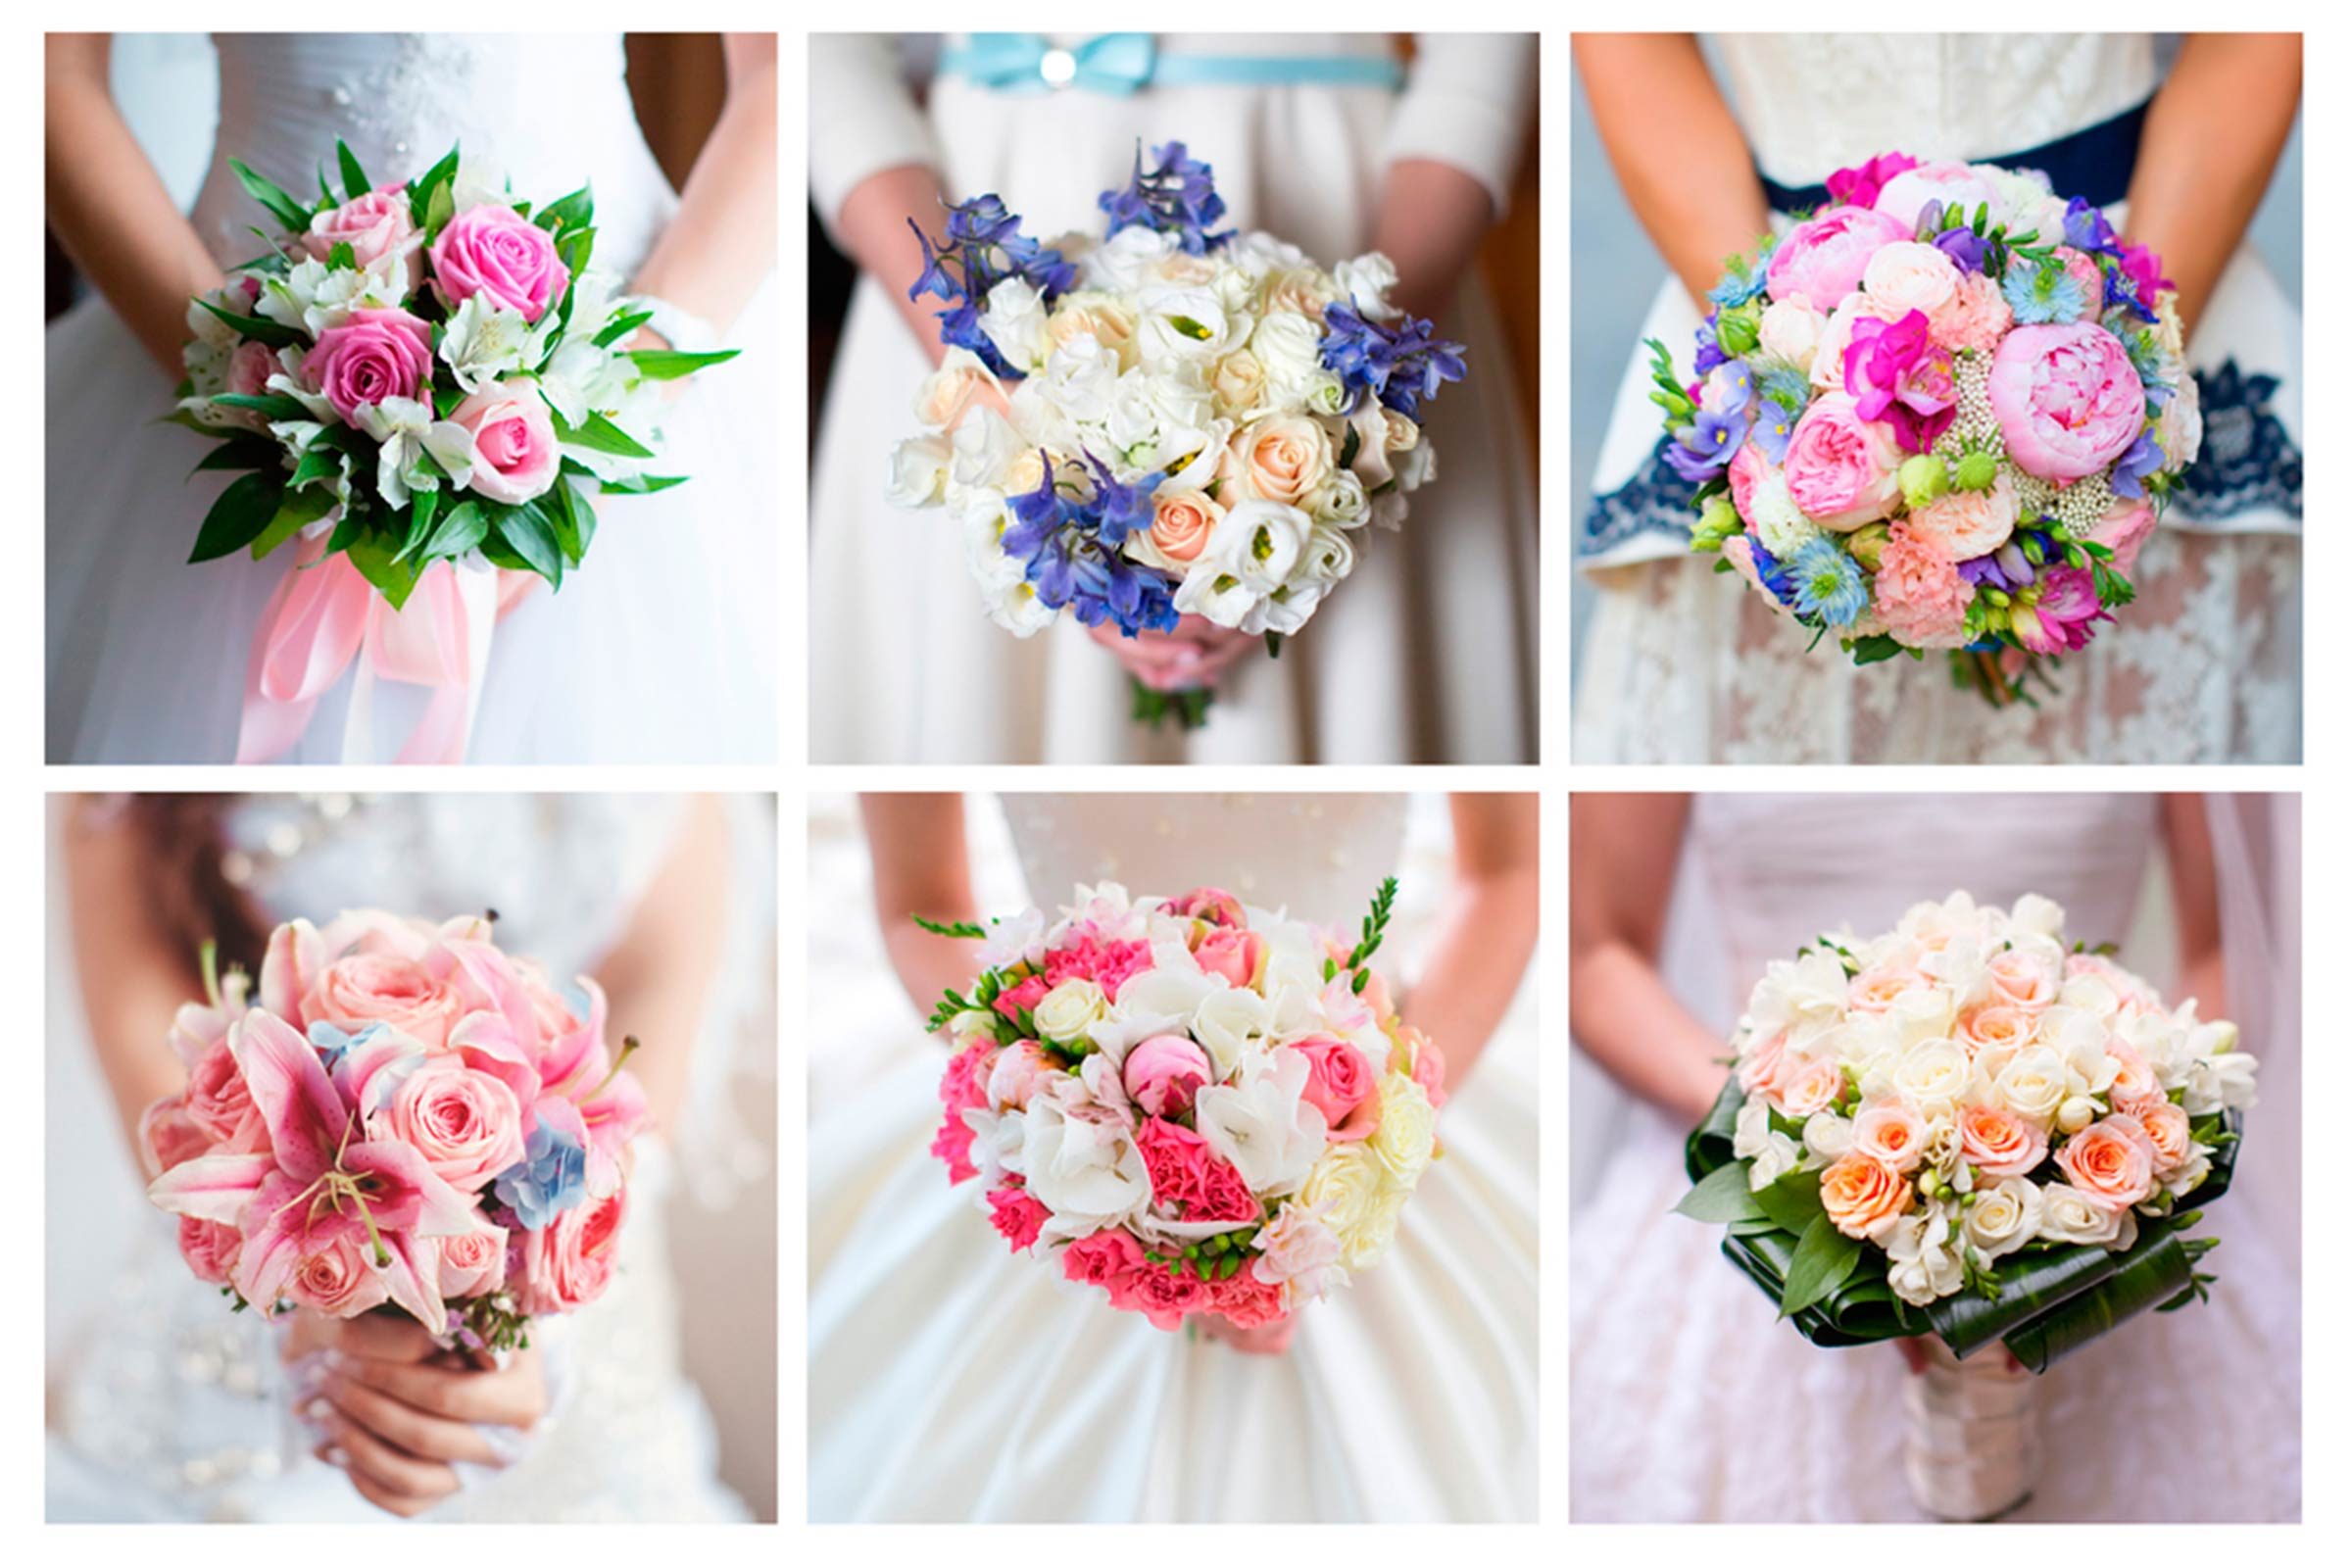 Why Do Brides Carry Bouquets for Their Wedding?